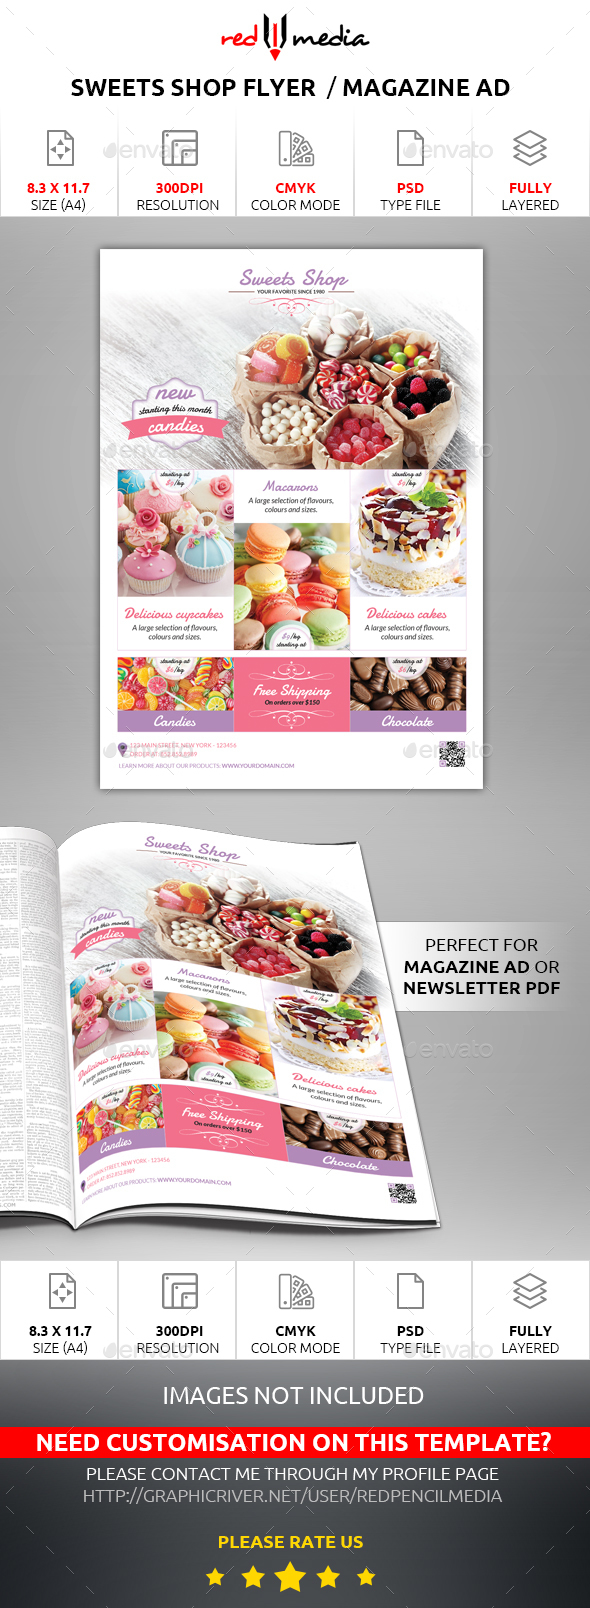 Sweets Shop Flyer / Magazine AD by REDPENCILMEDIA ...